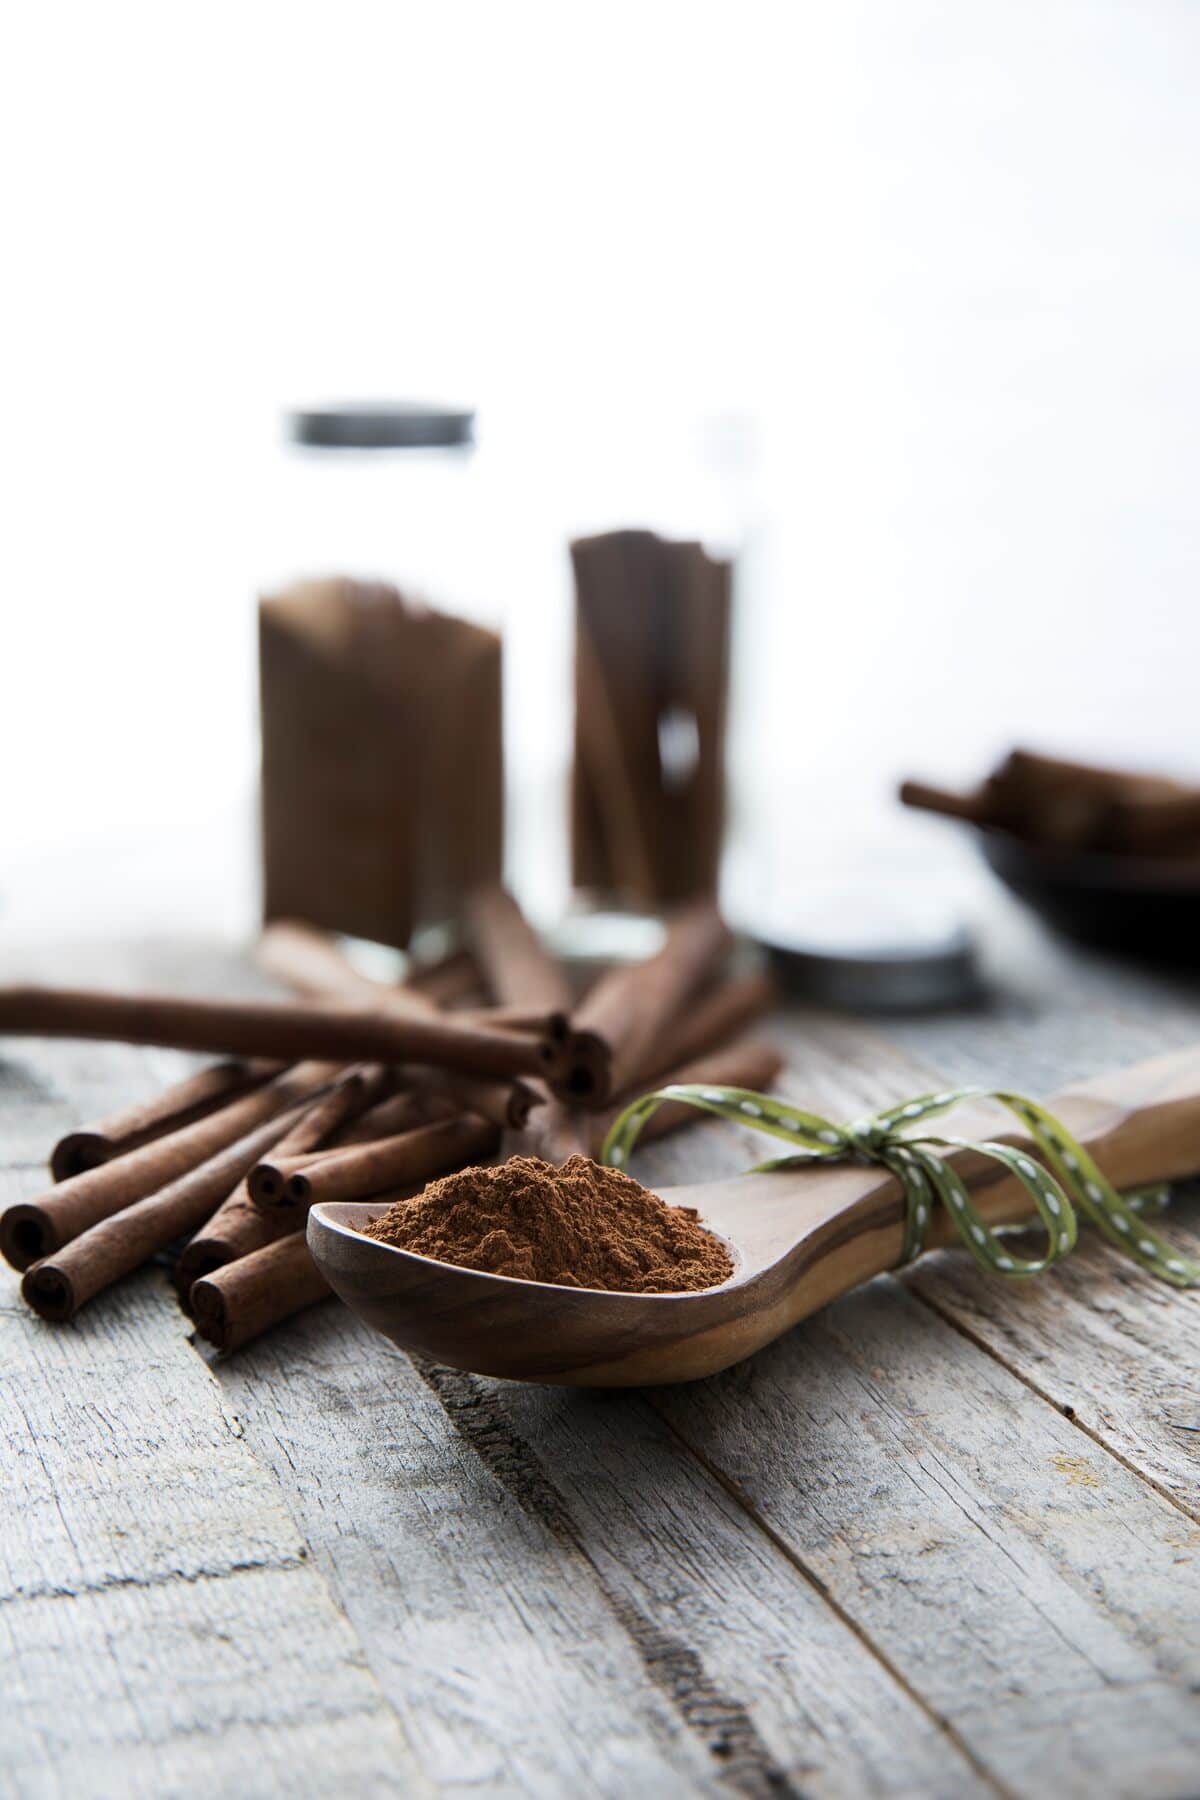 wooden spoon filled with ground cinnamon in front of cinnamon sticks.